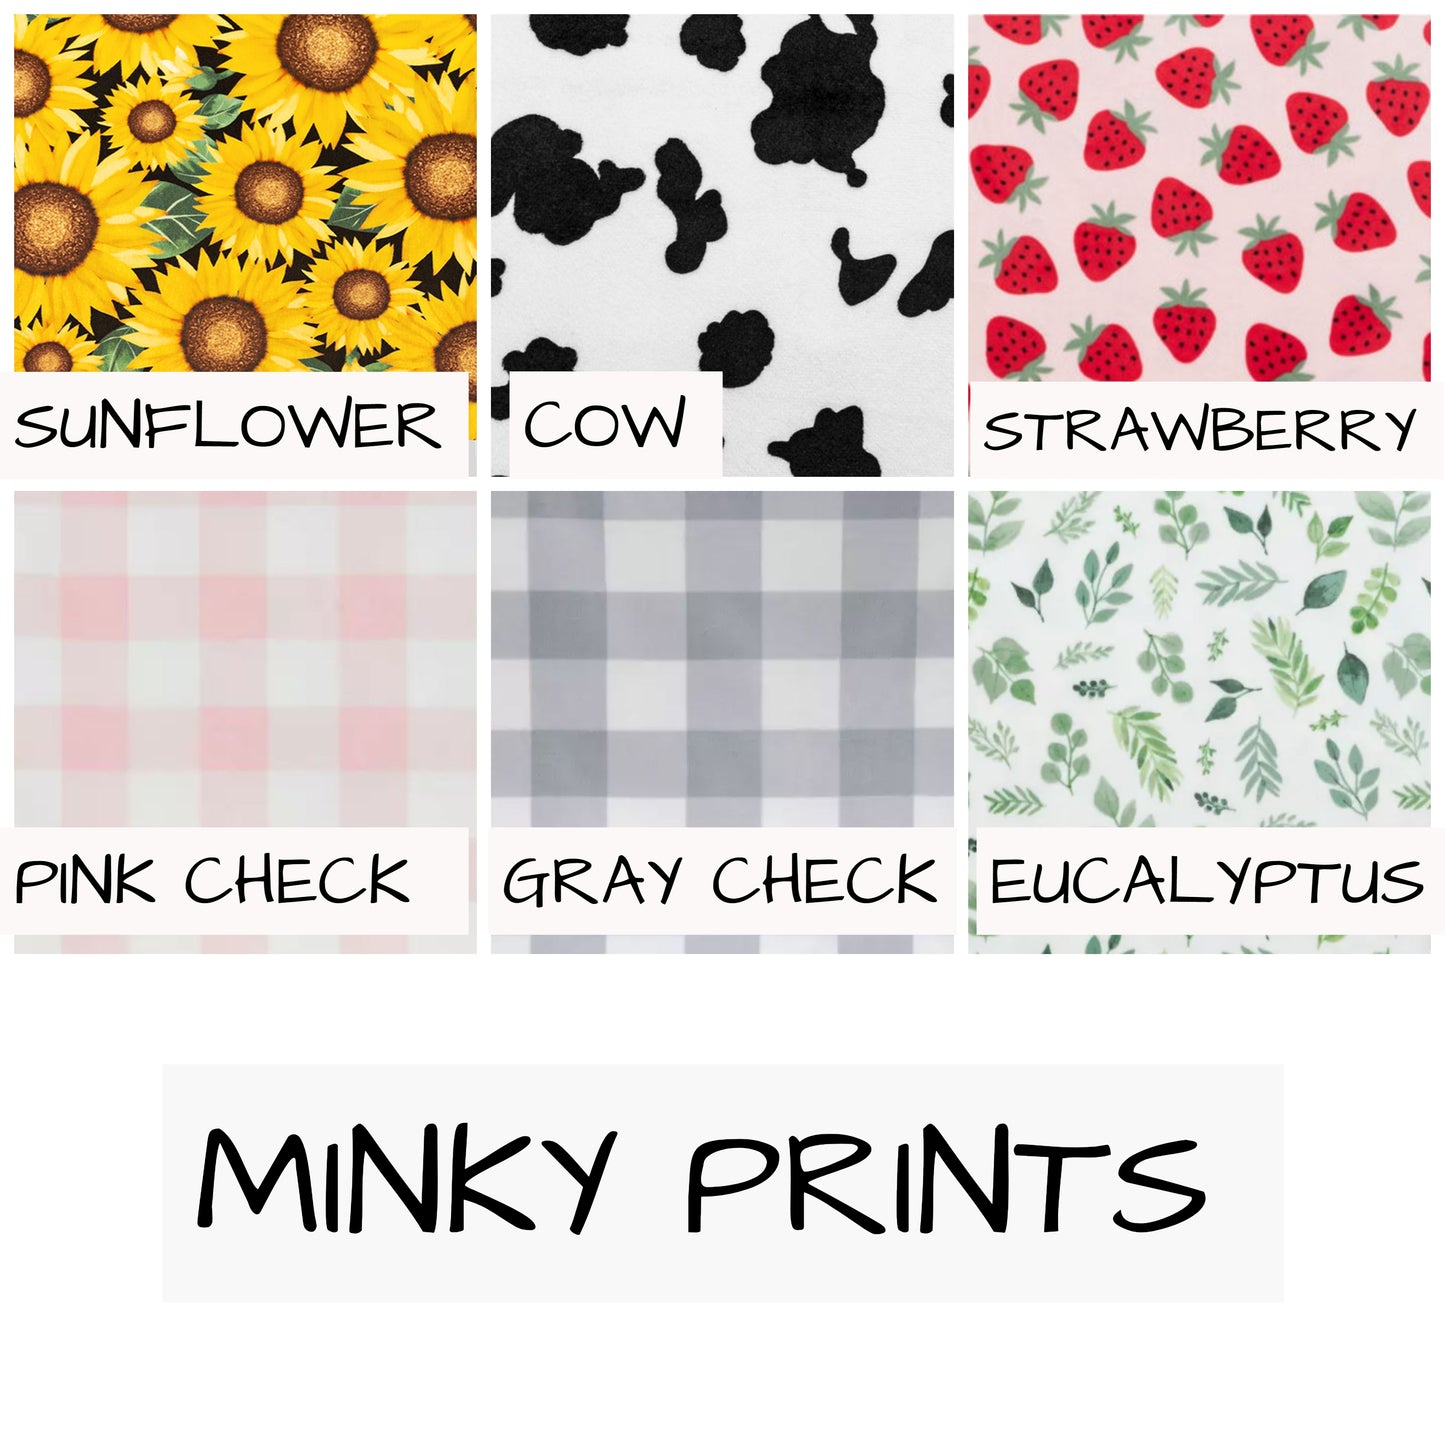 minky prints available for the pillow